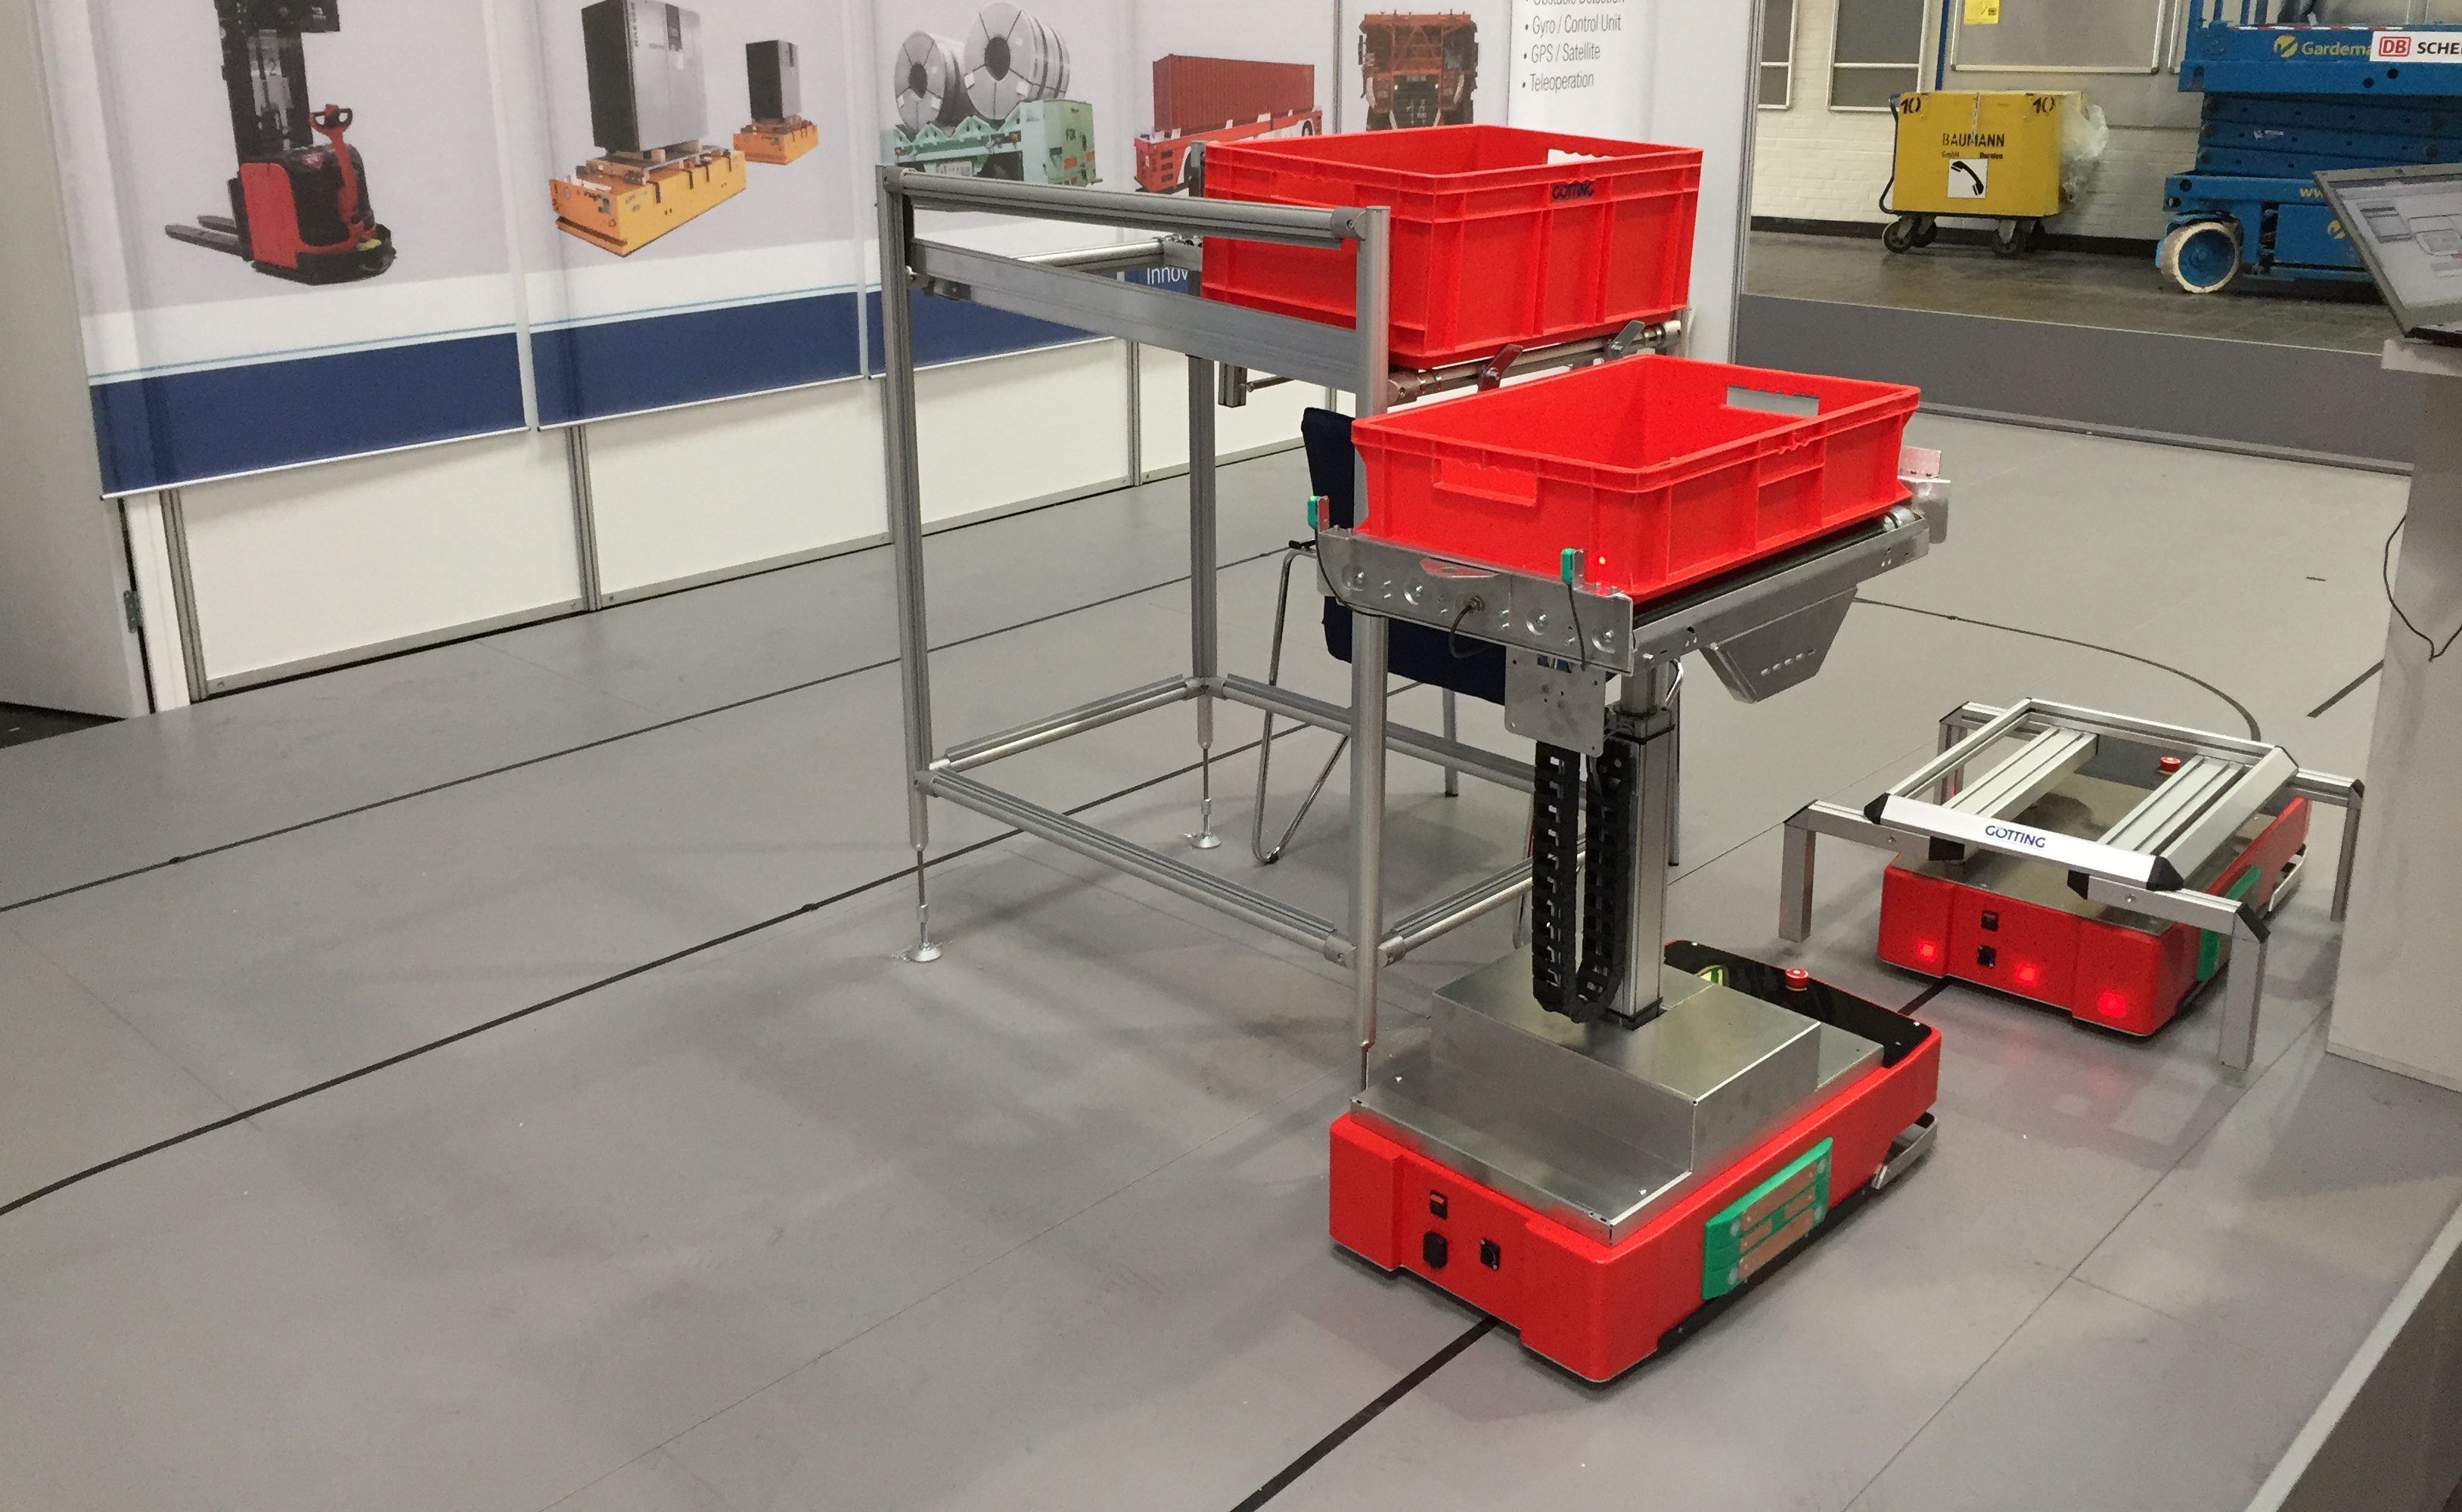 Automated guided vehicle system for SMEs